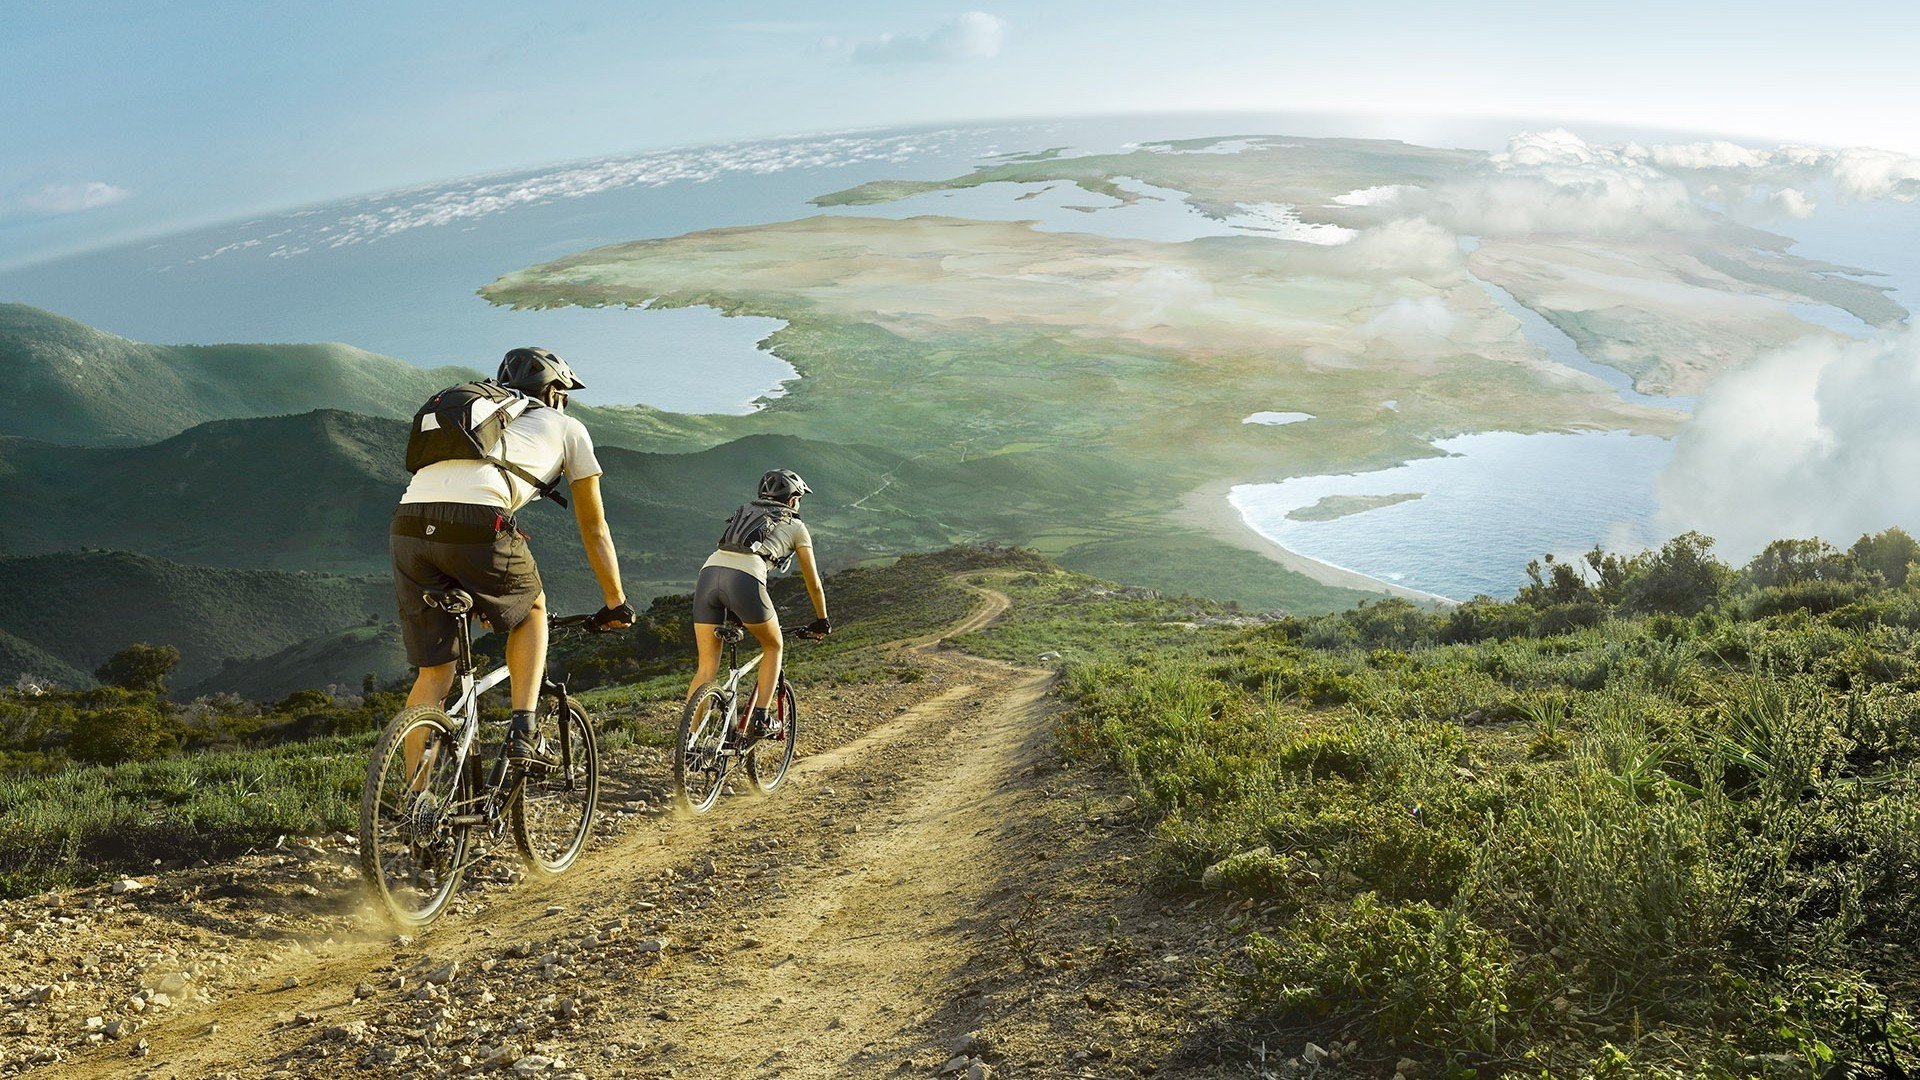 men, Women, Cycling, Nature, Landscape, Hill, Bicycle, Africa, Europe, Sea, Road, Photo manipulation, Clouds Wallpaper